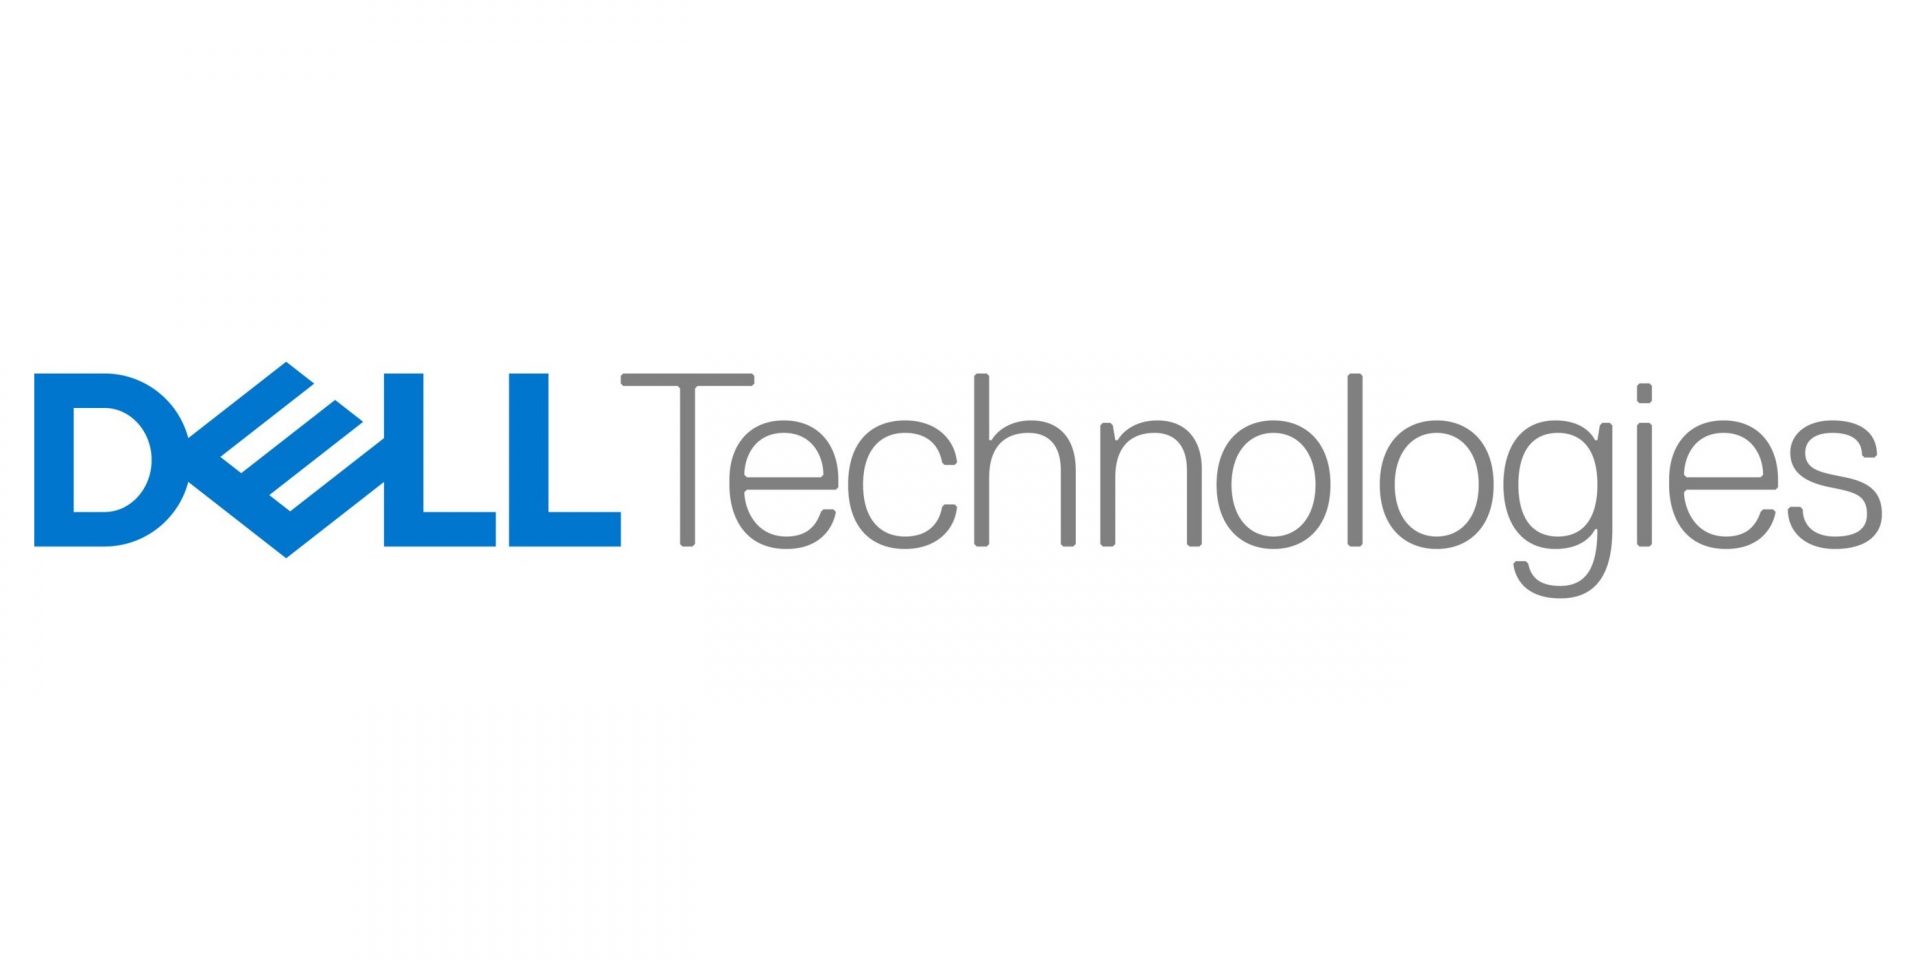 Dell Applied sciences experiences that it beat market-diagnosis estimates for the sixth quarter working with its most recent earning results